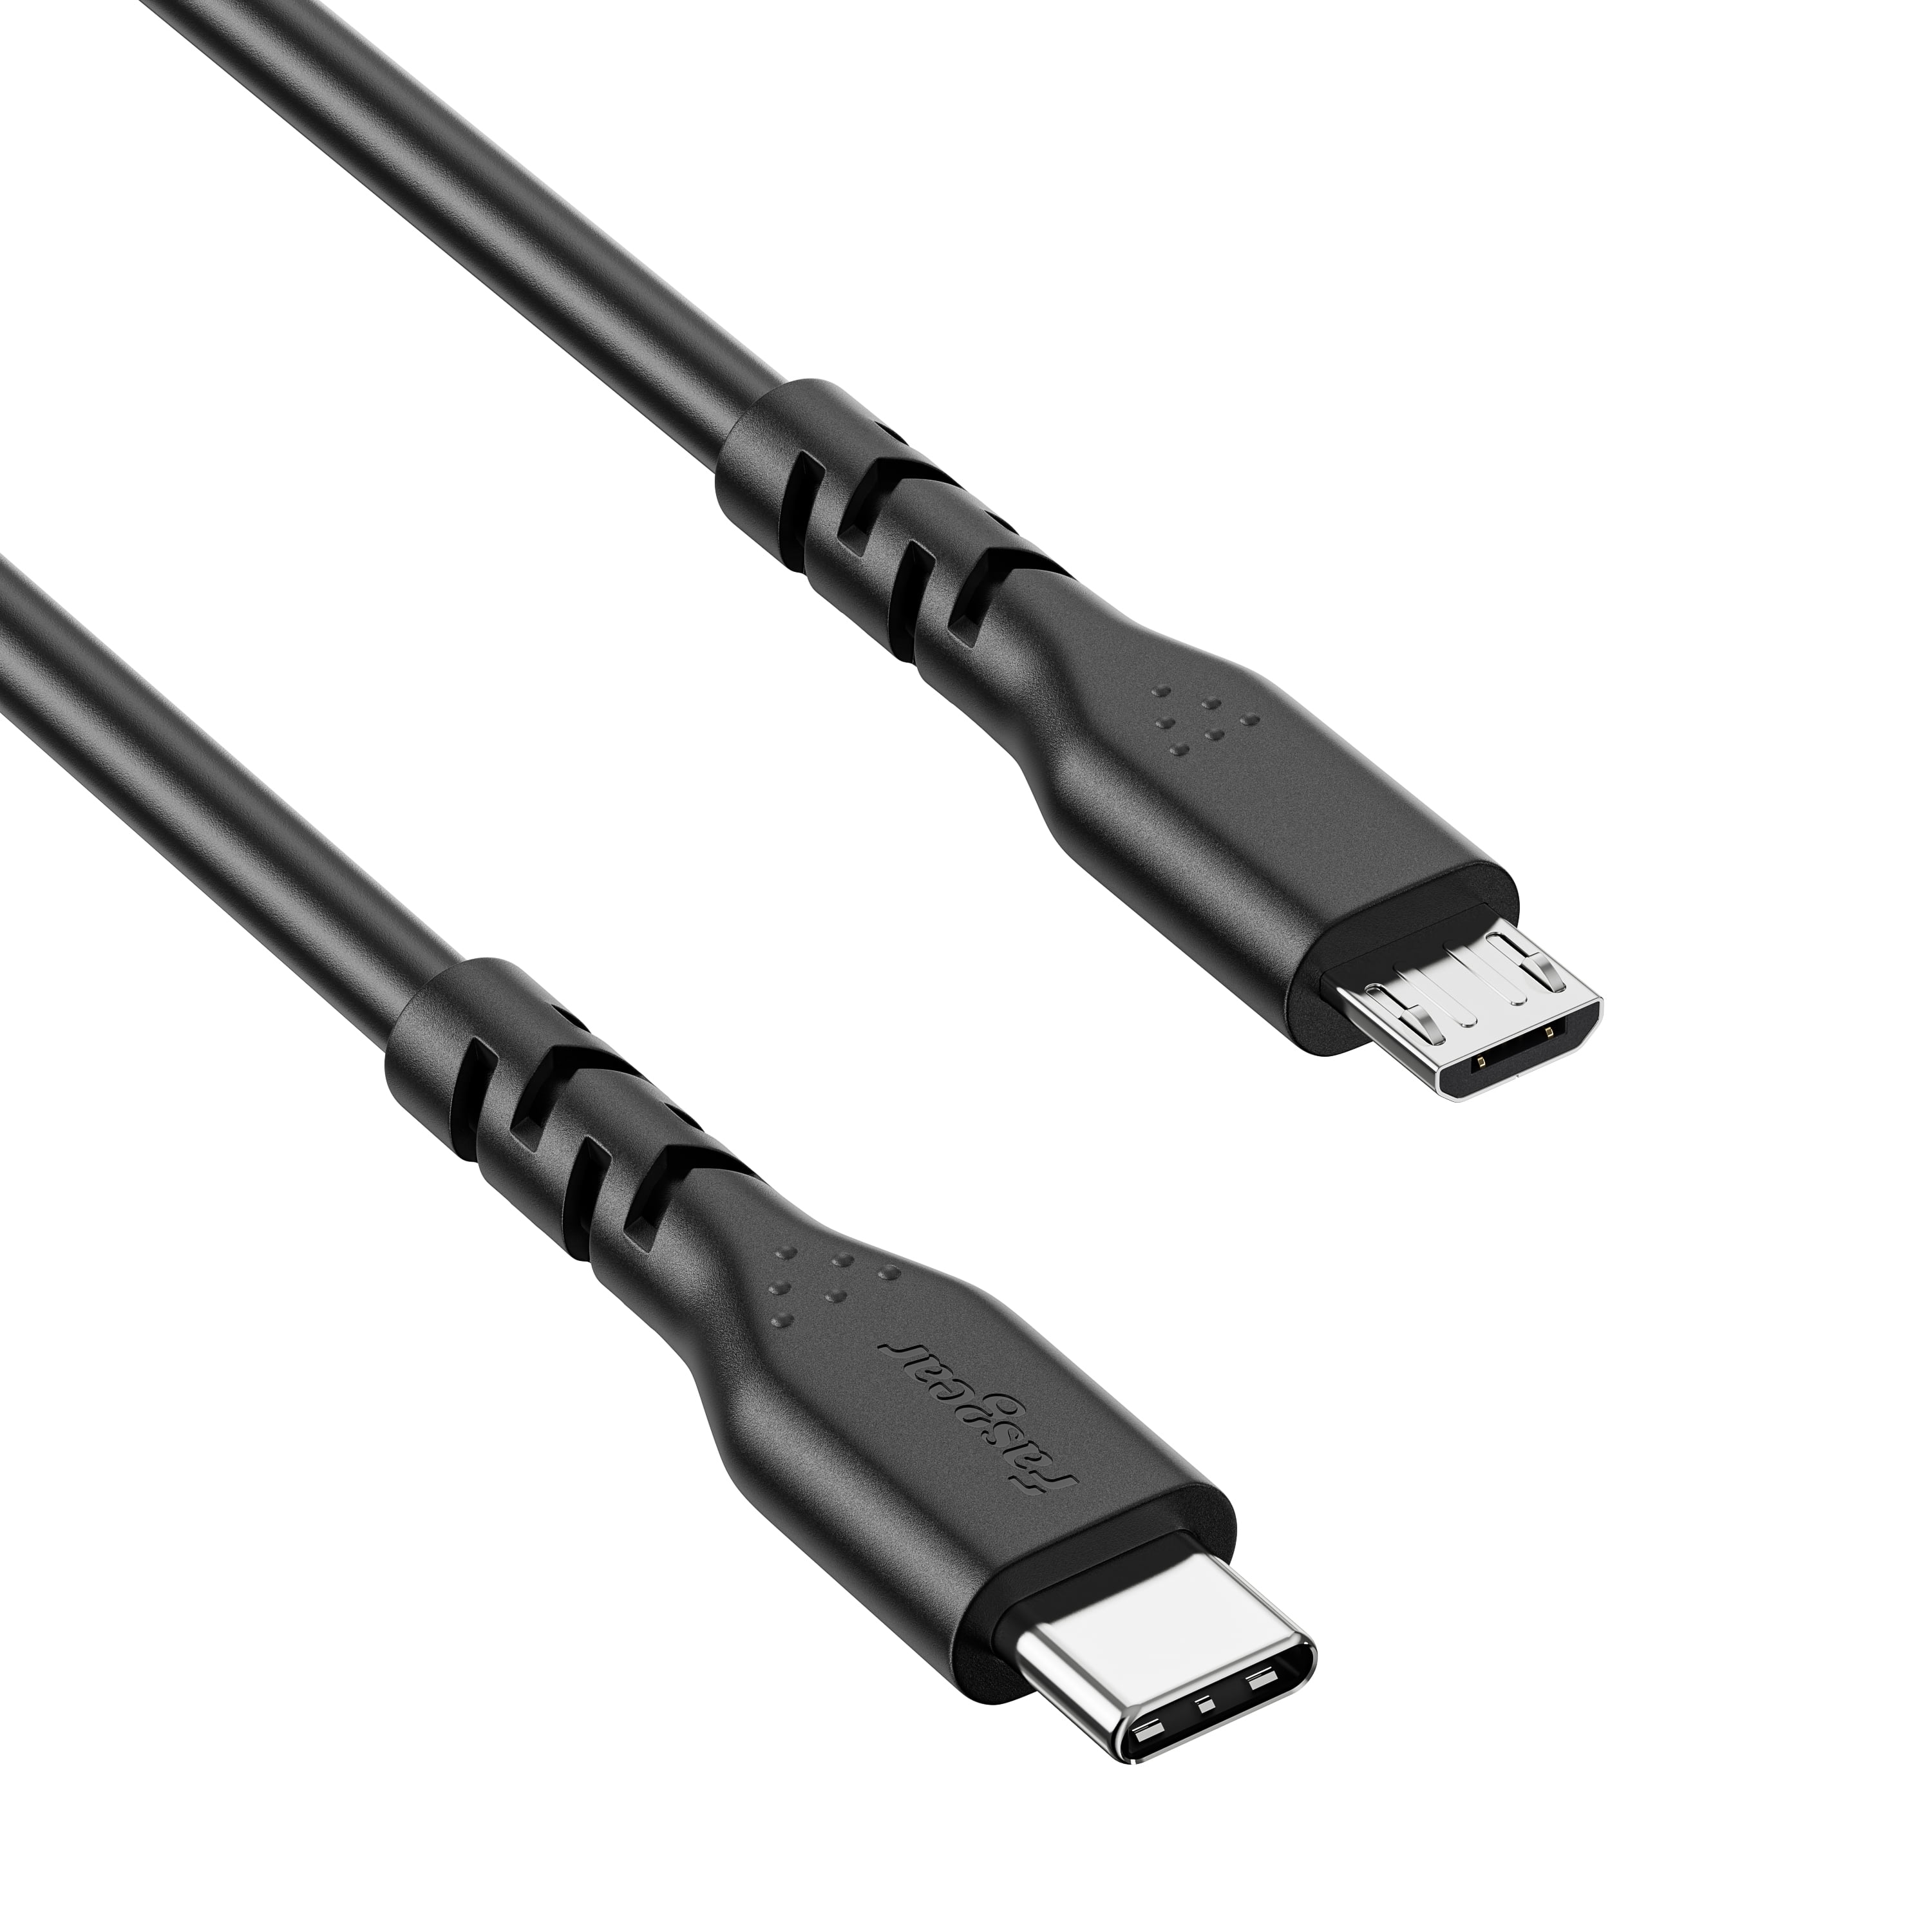 Fasgear USB C to Micro USB Cable 3ft/1m - 1 Pack USB 2.0 Type C to Micro USB  Cord Support Data Sync & Charging Compatible with MacBook Pro/Air, Power  Bank, PS4/X-box Controller